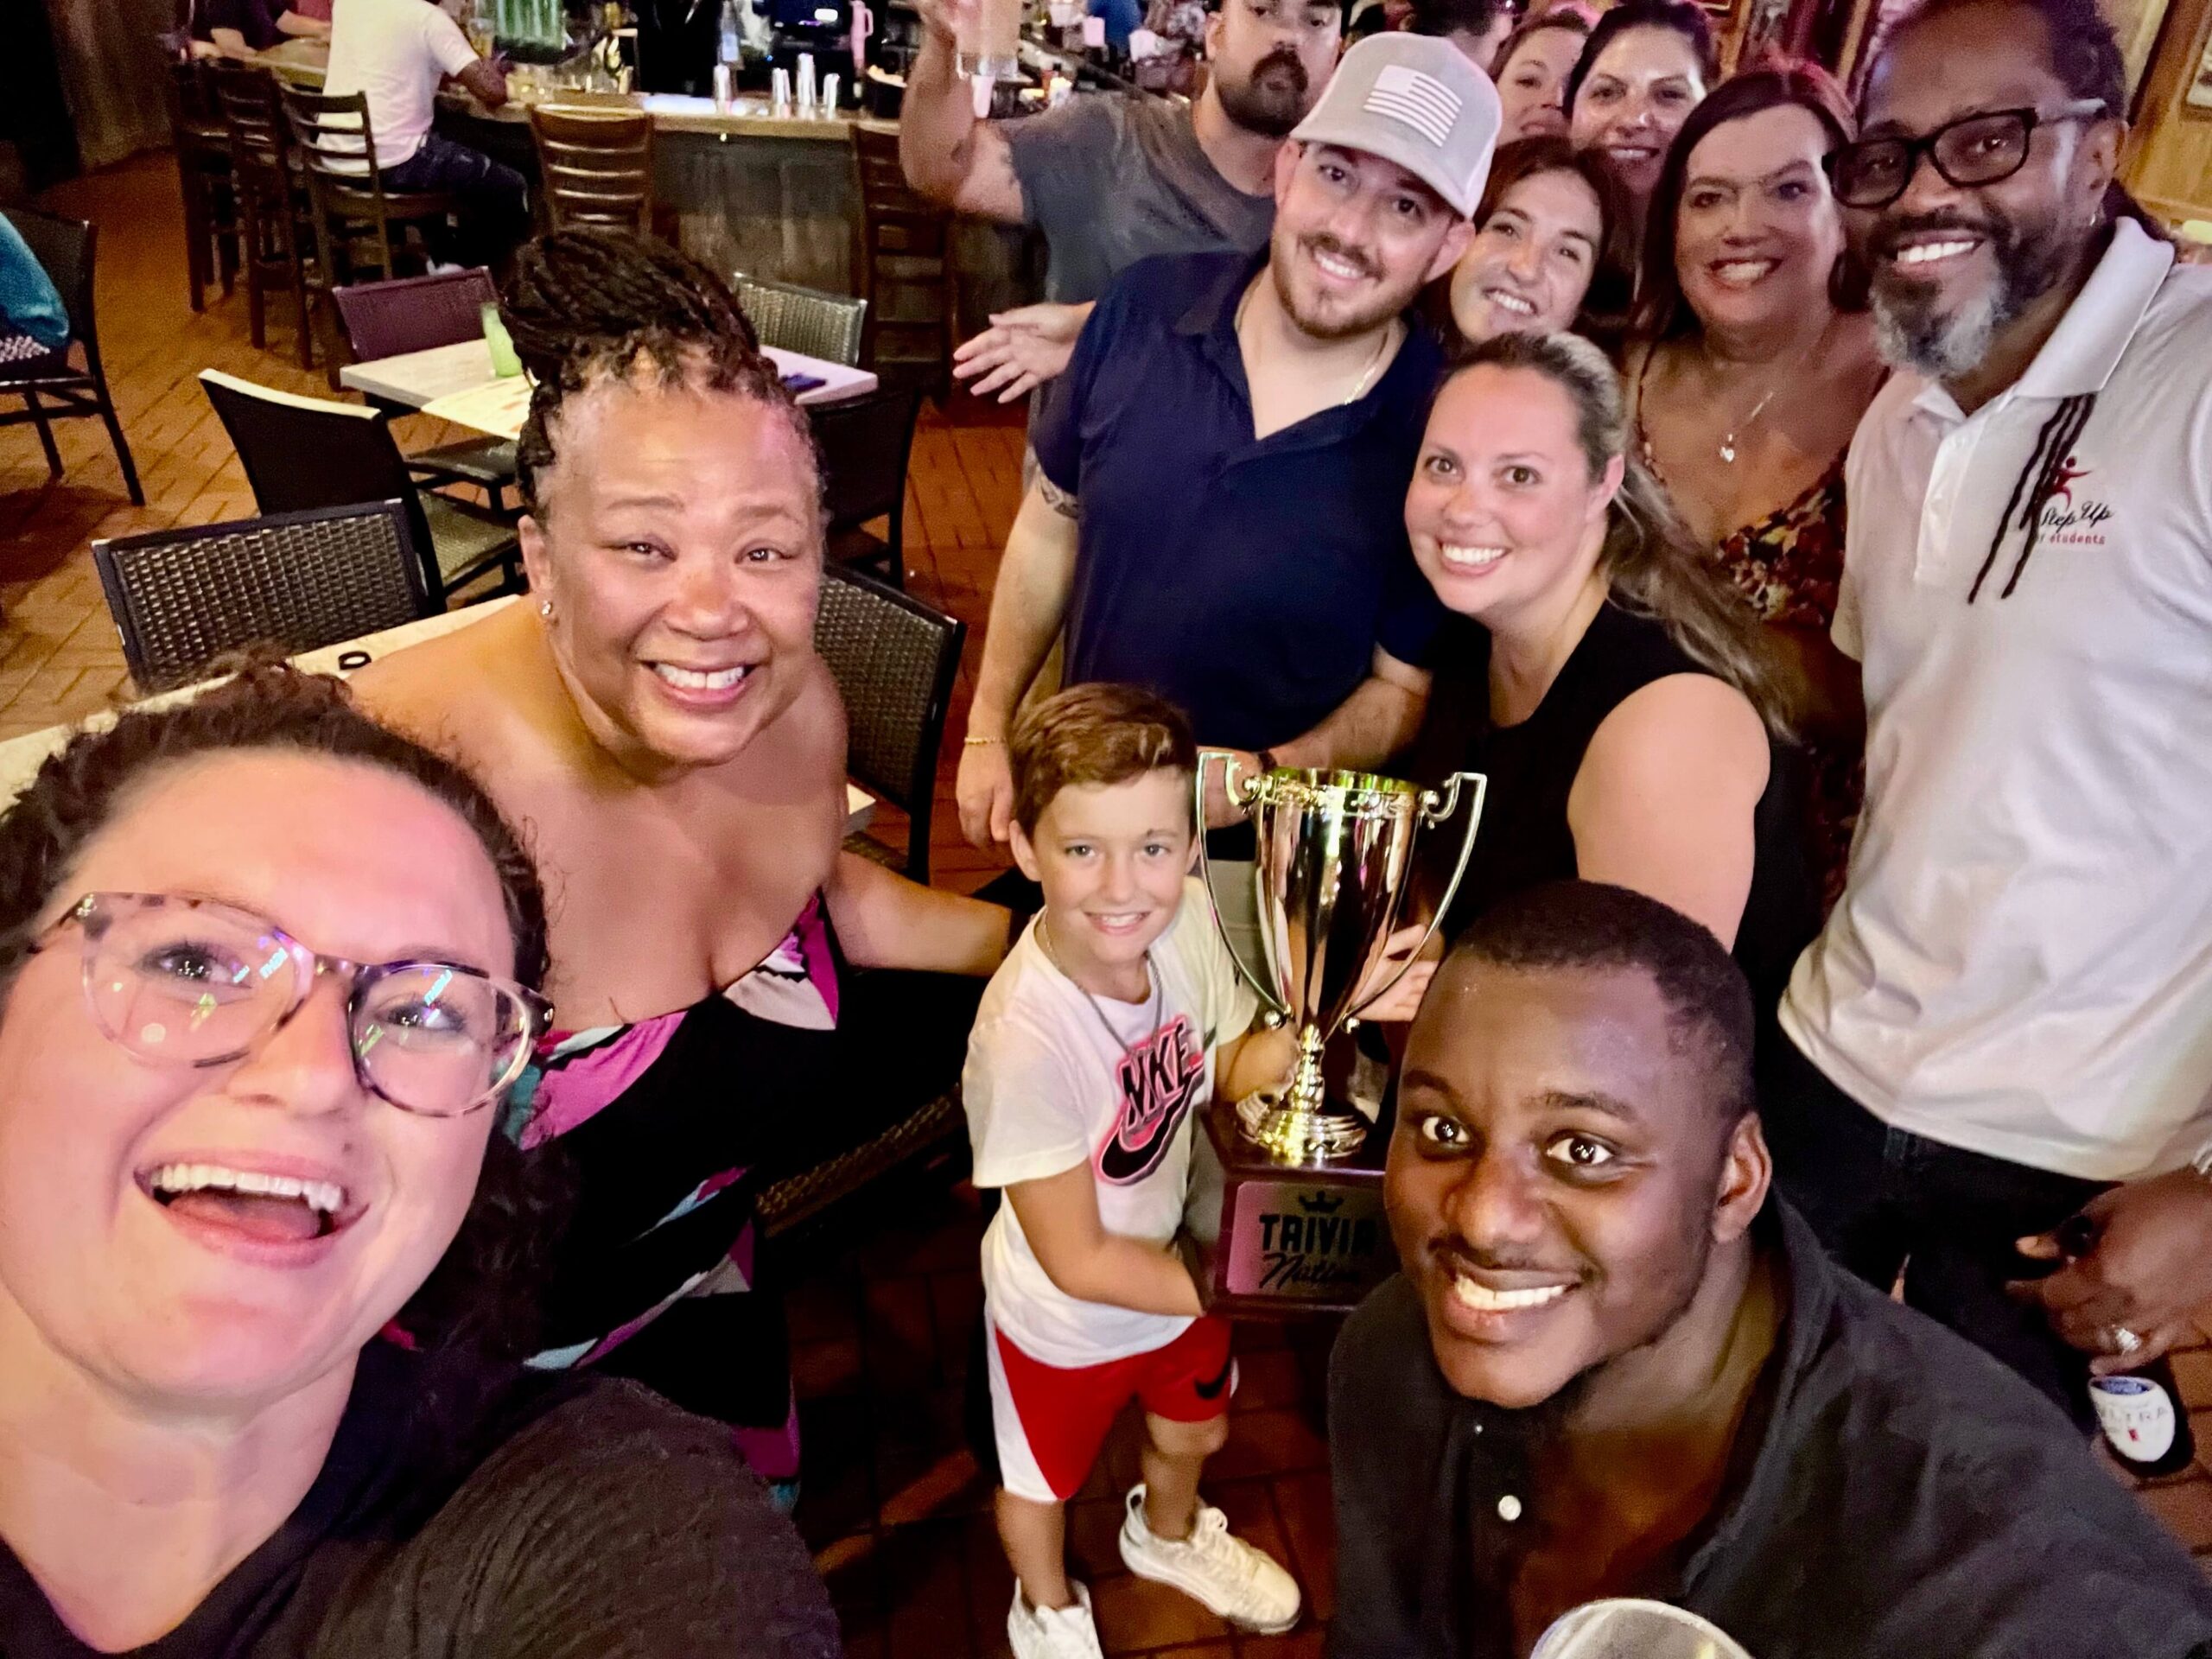 Miller's Ale House Jacksonville FL 32246 trivia night: a large group of people all smiling and leaning in together with a young boy in the middle holding up a Trivia Nation trophy